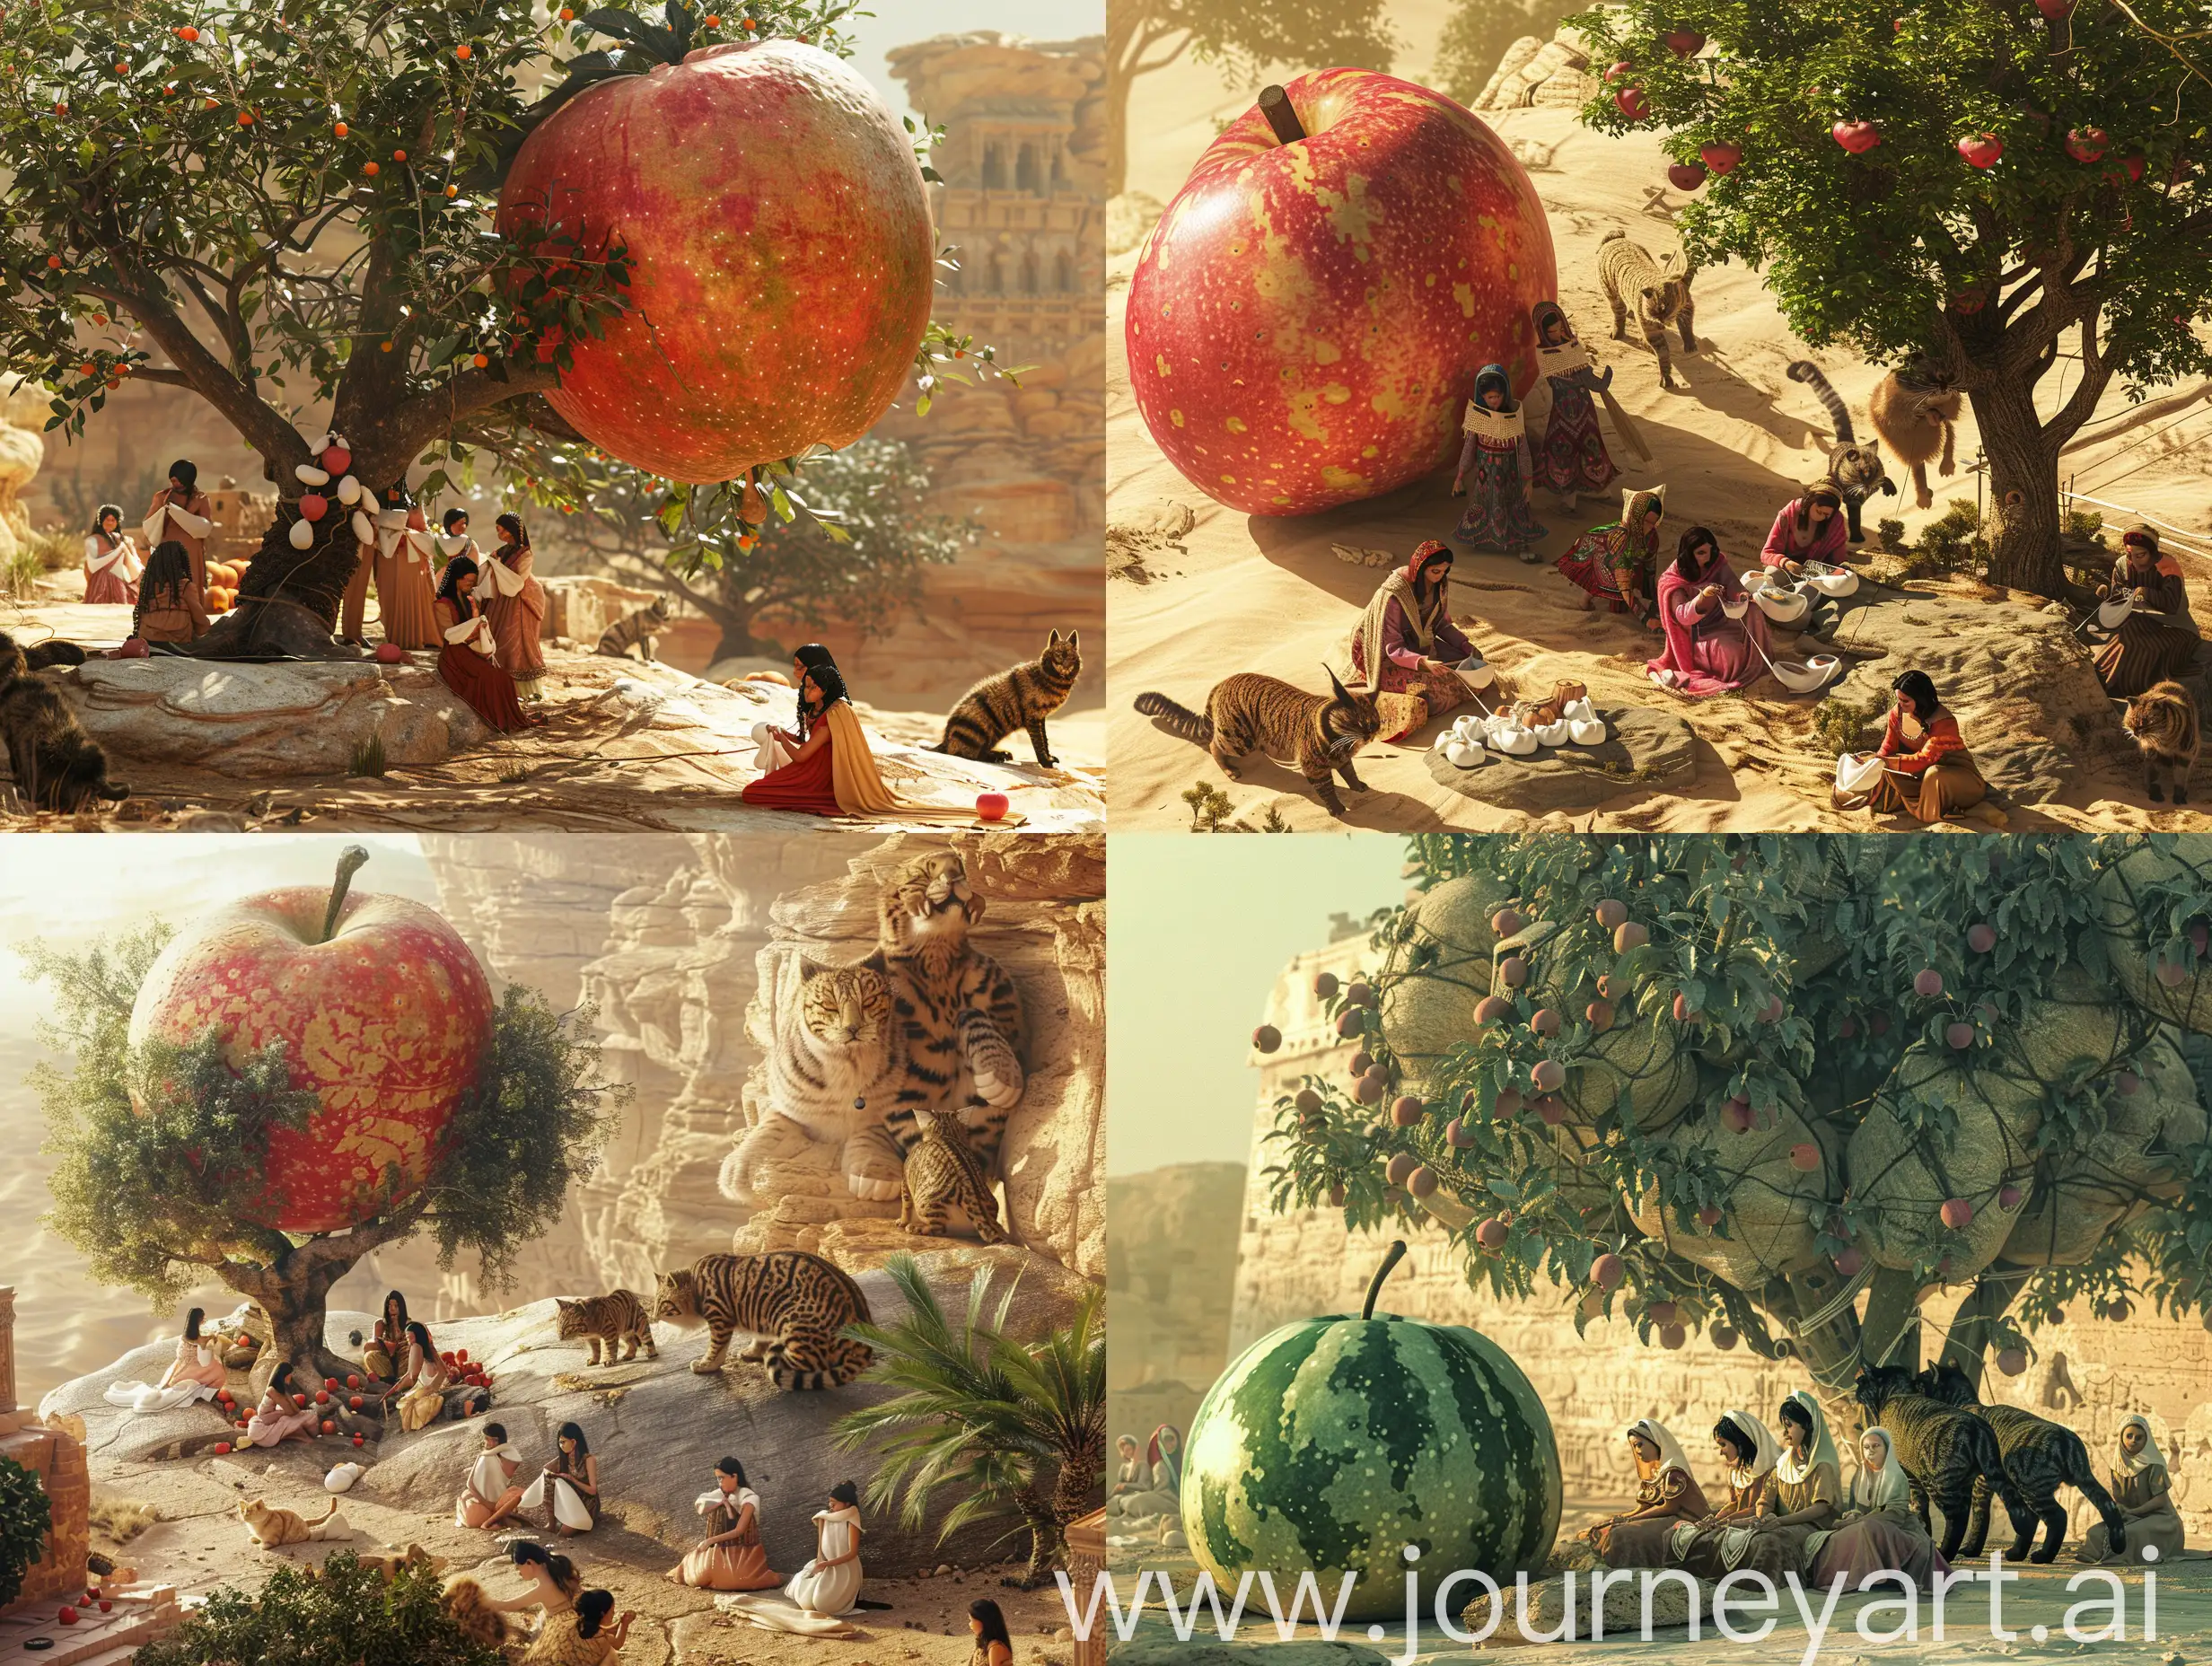 A large apple the size of a watermelon is on a rock next to a large apple tree, and beautiful young Persian women are knitting cotton shawls under this tree, while several giant cats the size of horses are tied to the tree next to the tree. in a desert, in an ancient civilization, cinematic, epic realism,8K, highly detailed, bird's eye view, glamour lighting, backlit